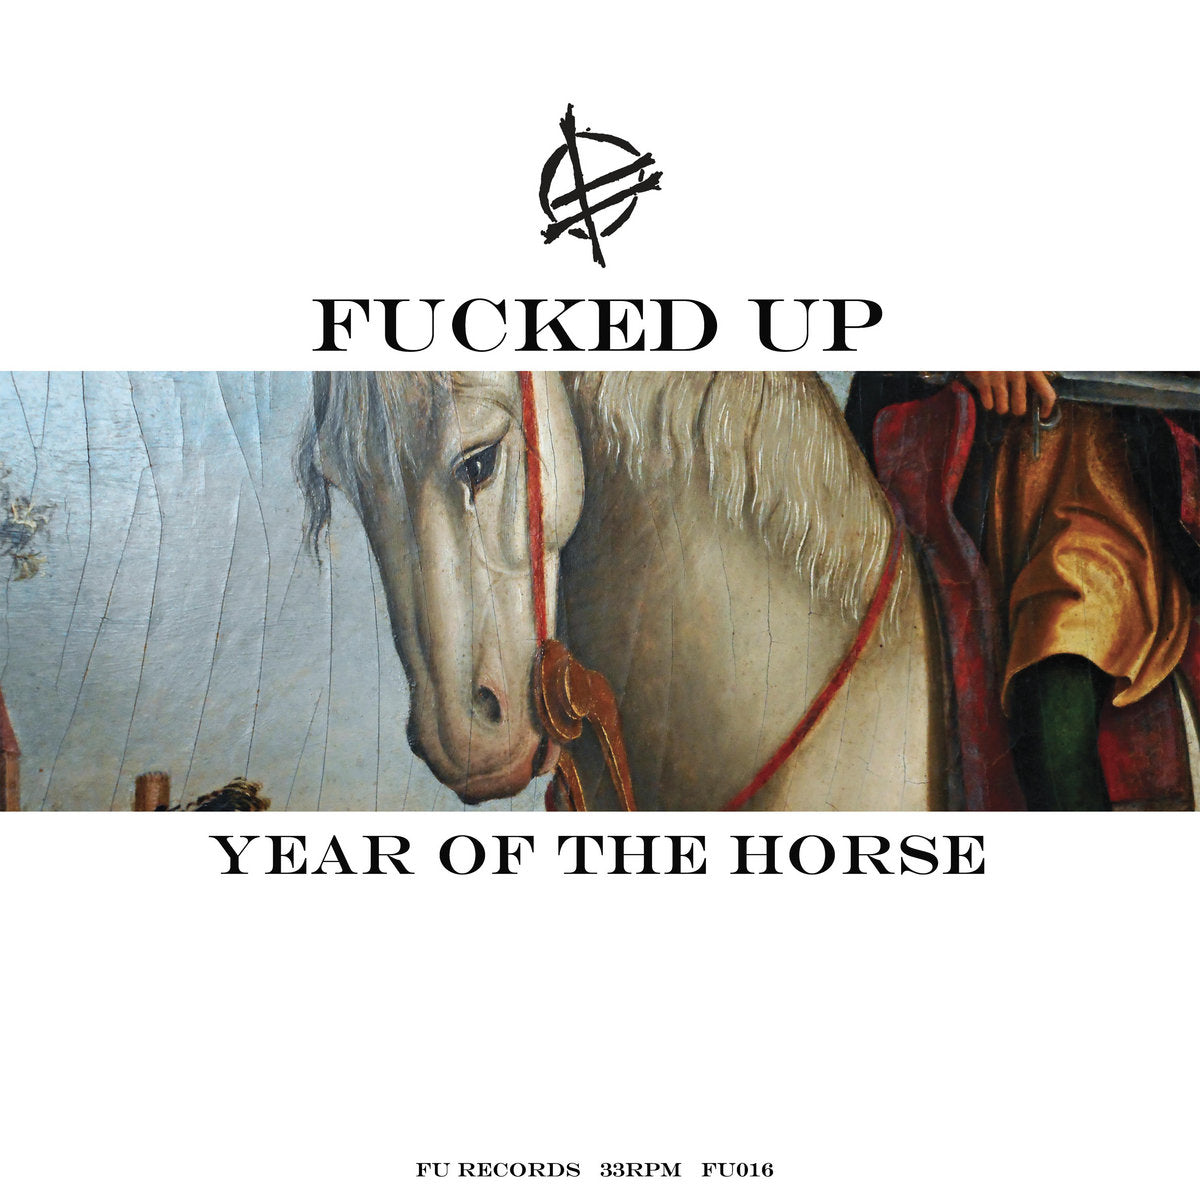 Fucked Up "Year of the Horse" 2x12" Vinyl